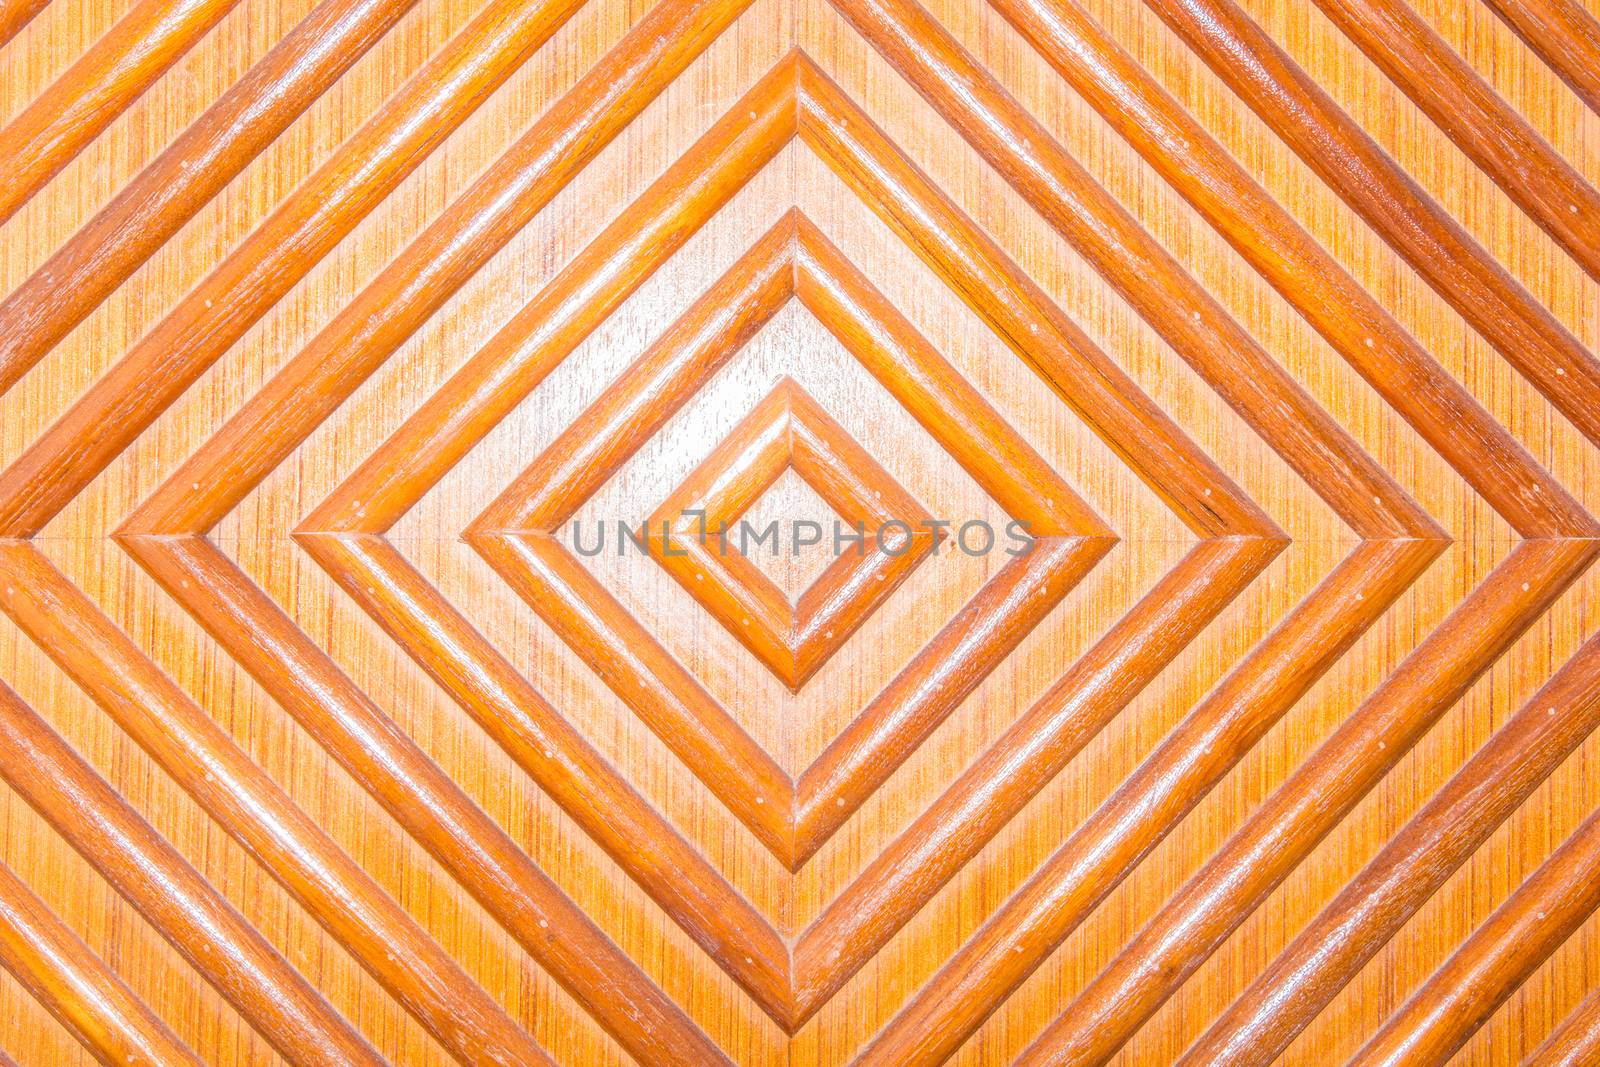 the beautiful abstract decorative wooden texture ideal for background and wallpaper purposes